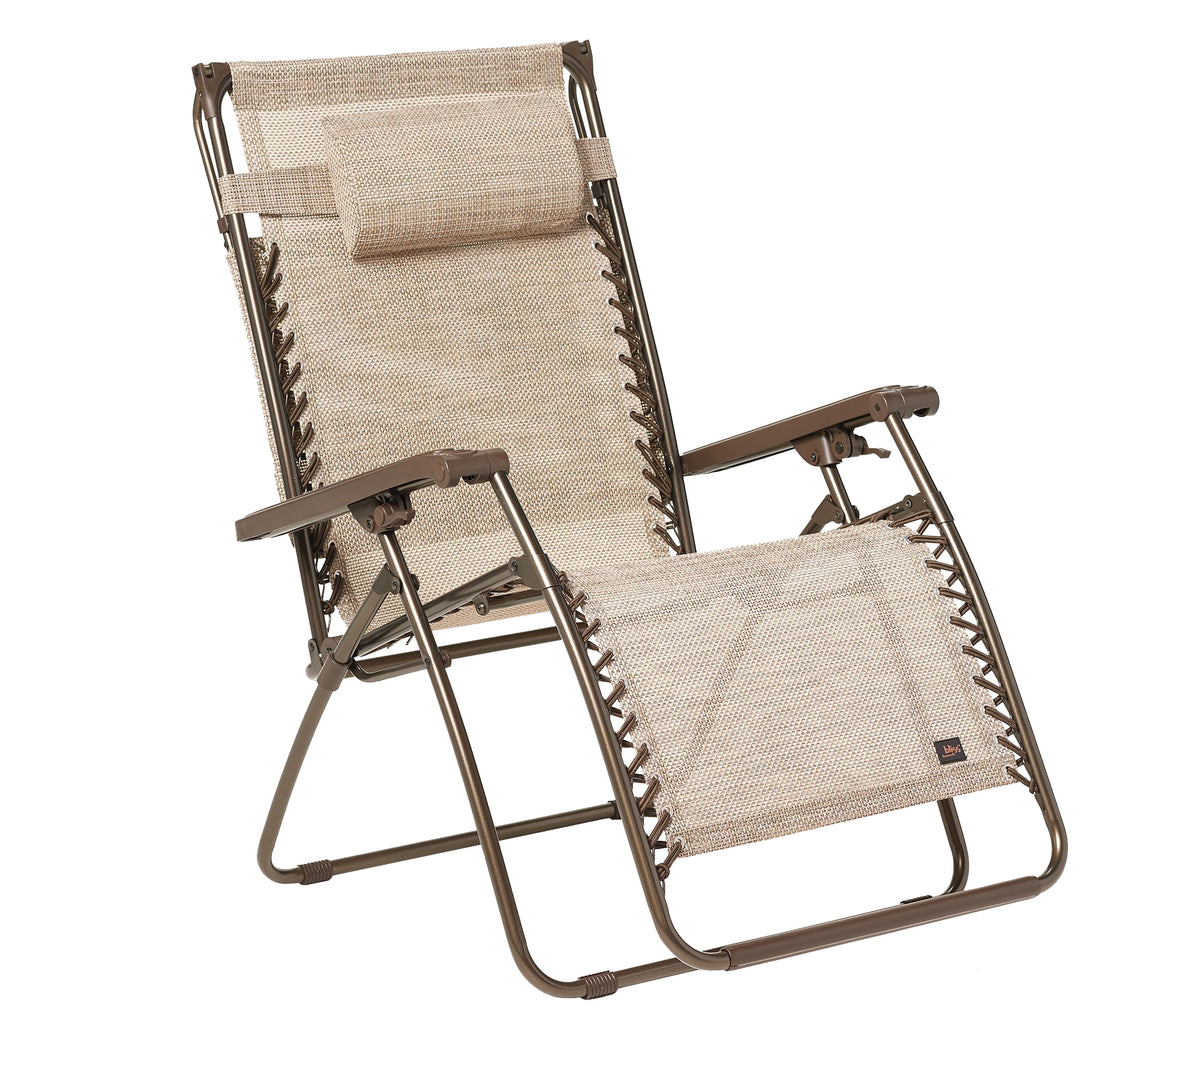 Bliss Hammocks 30-inch Wide XL Zero Gravity Chair in the sand variation without the Canopy up.